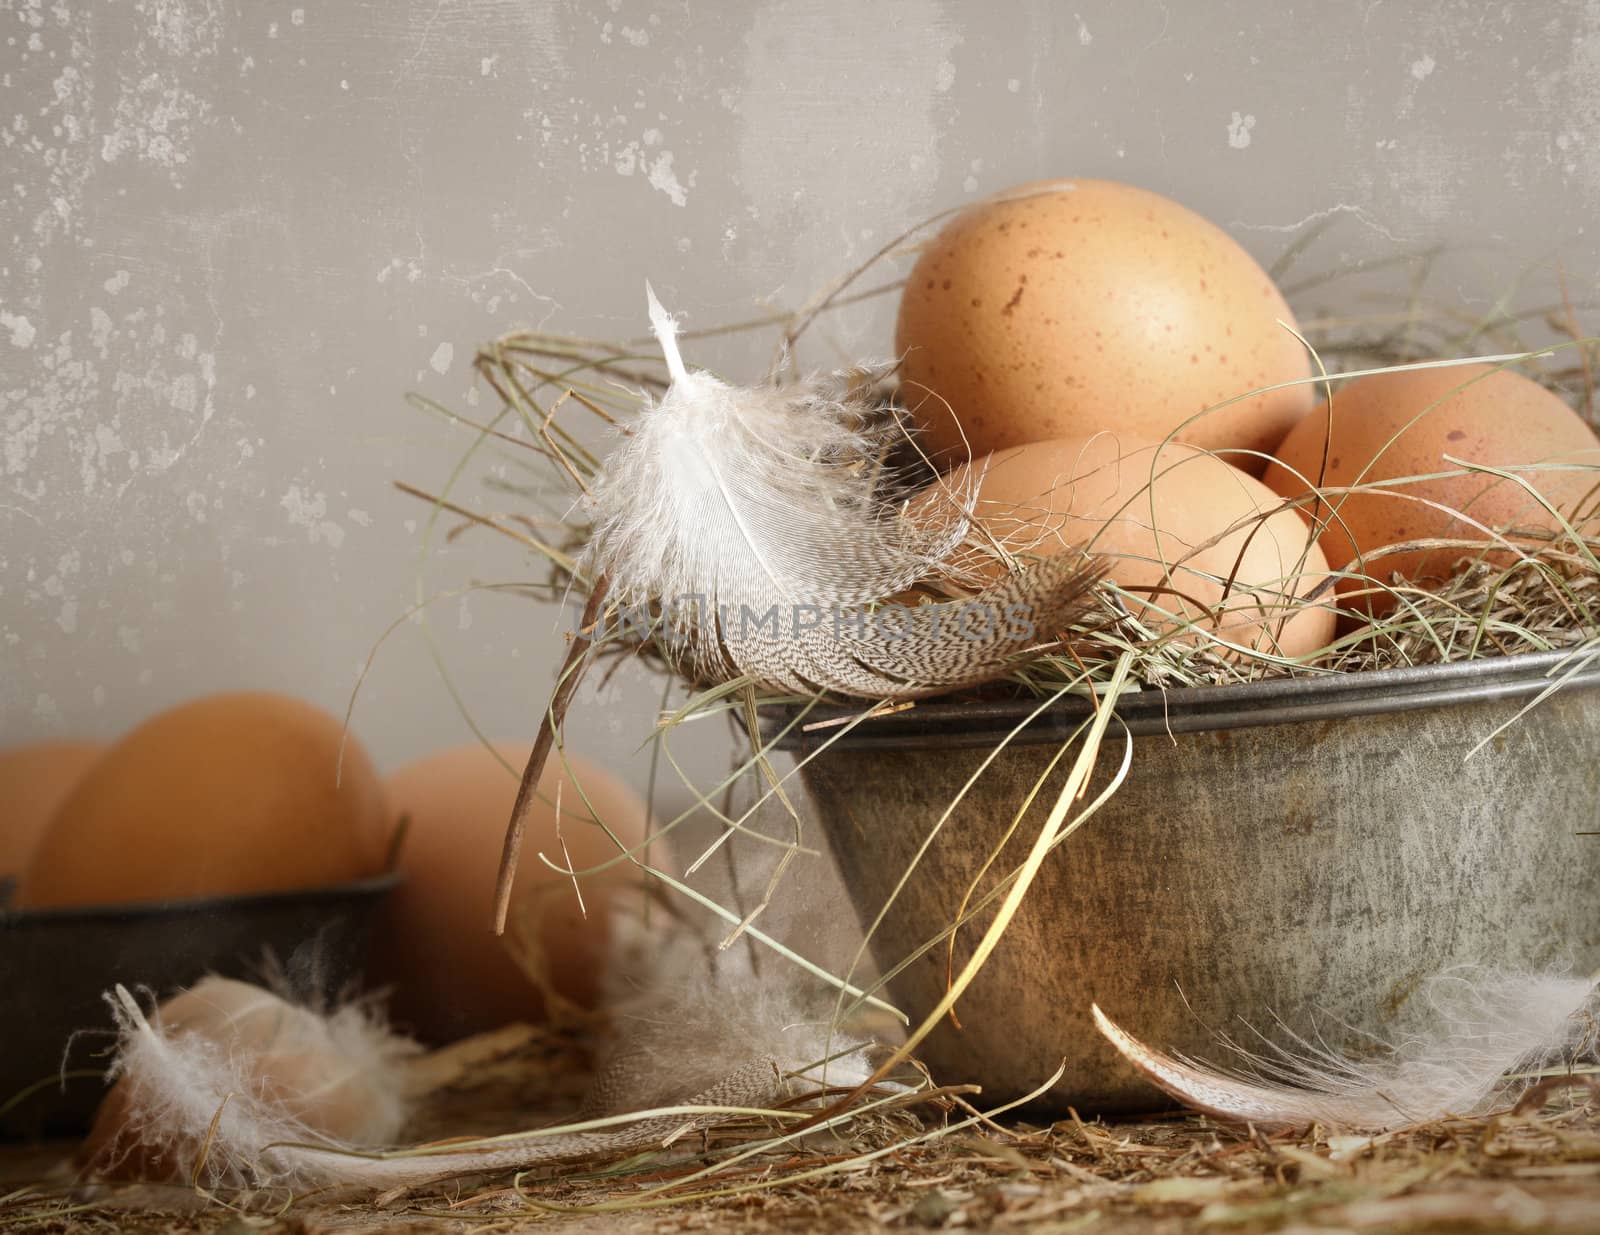 Brown speckled eggs with straw in old tin bowl